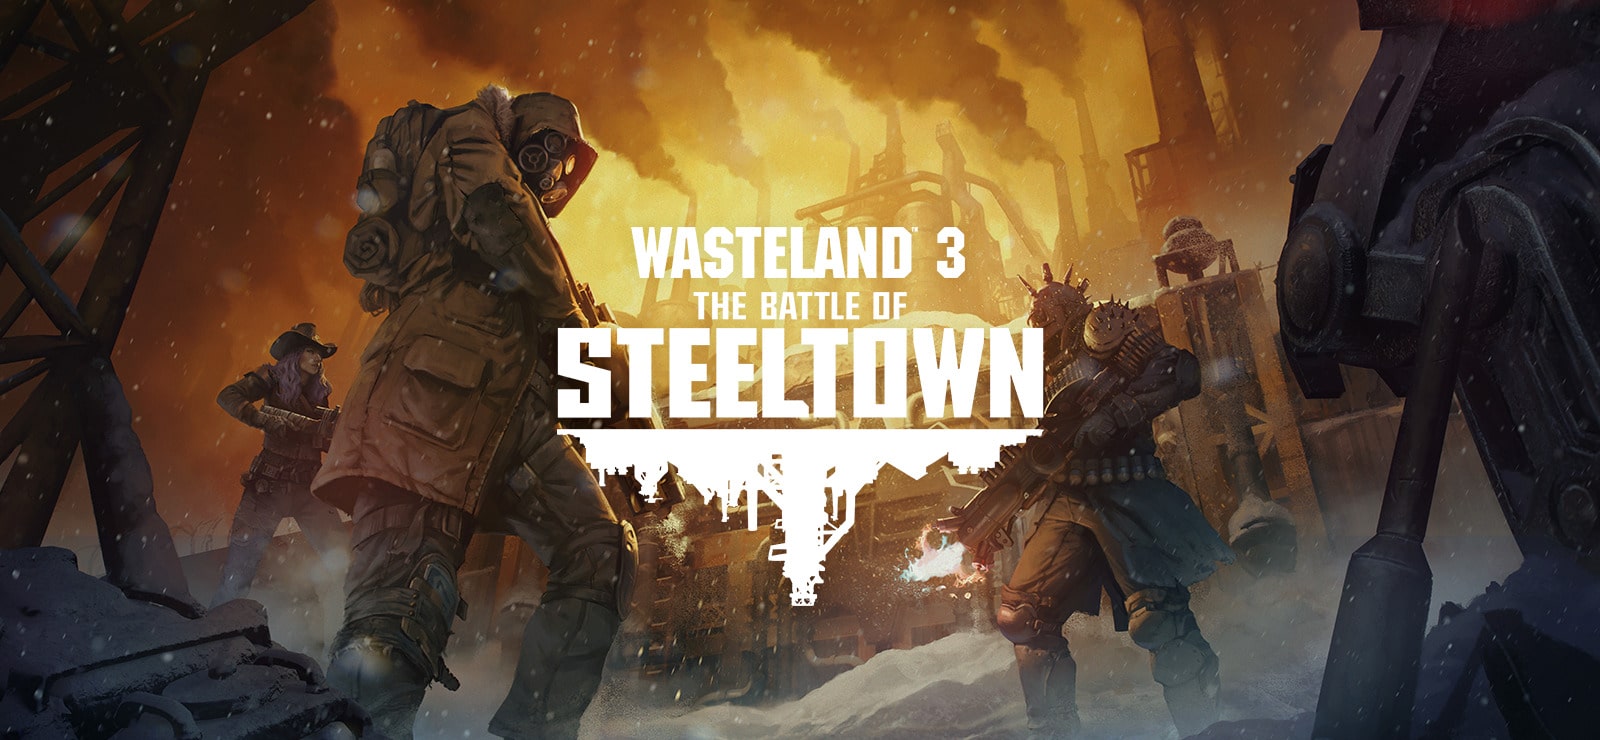 Wasteland 3 The Battle of Steeltown disponible